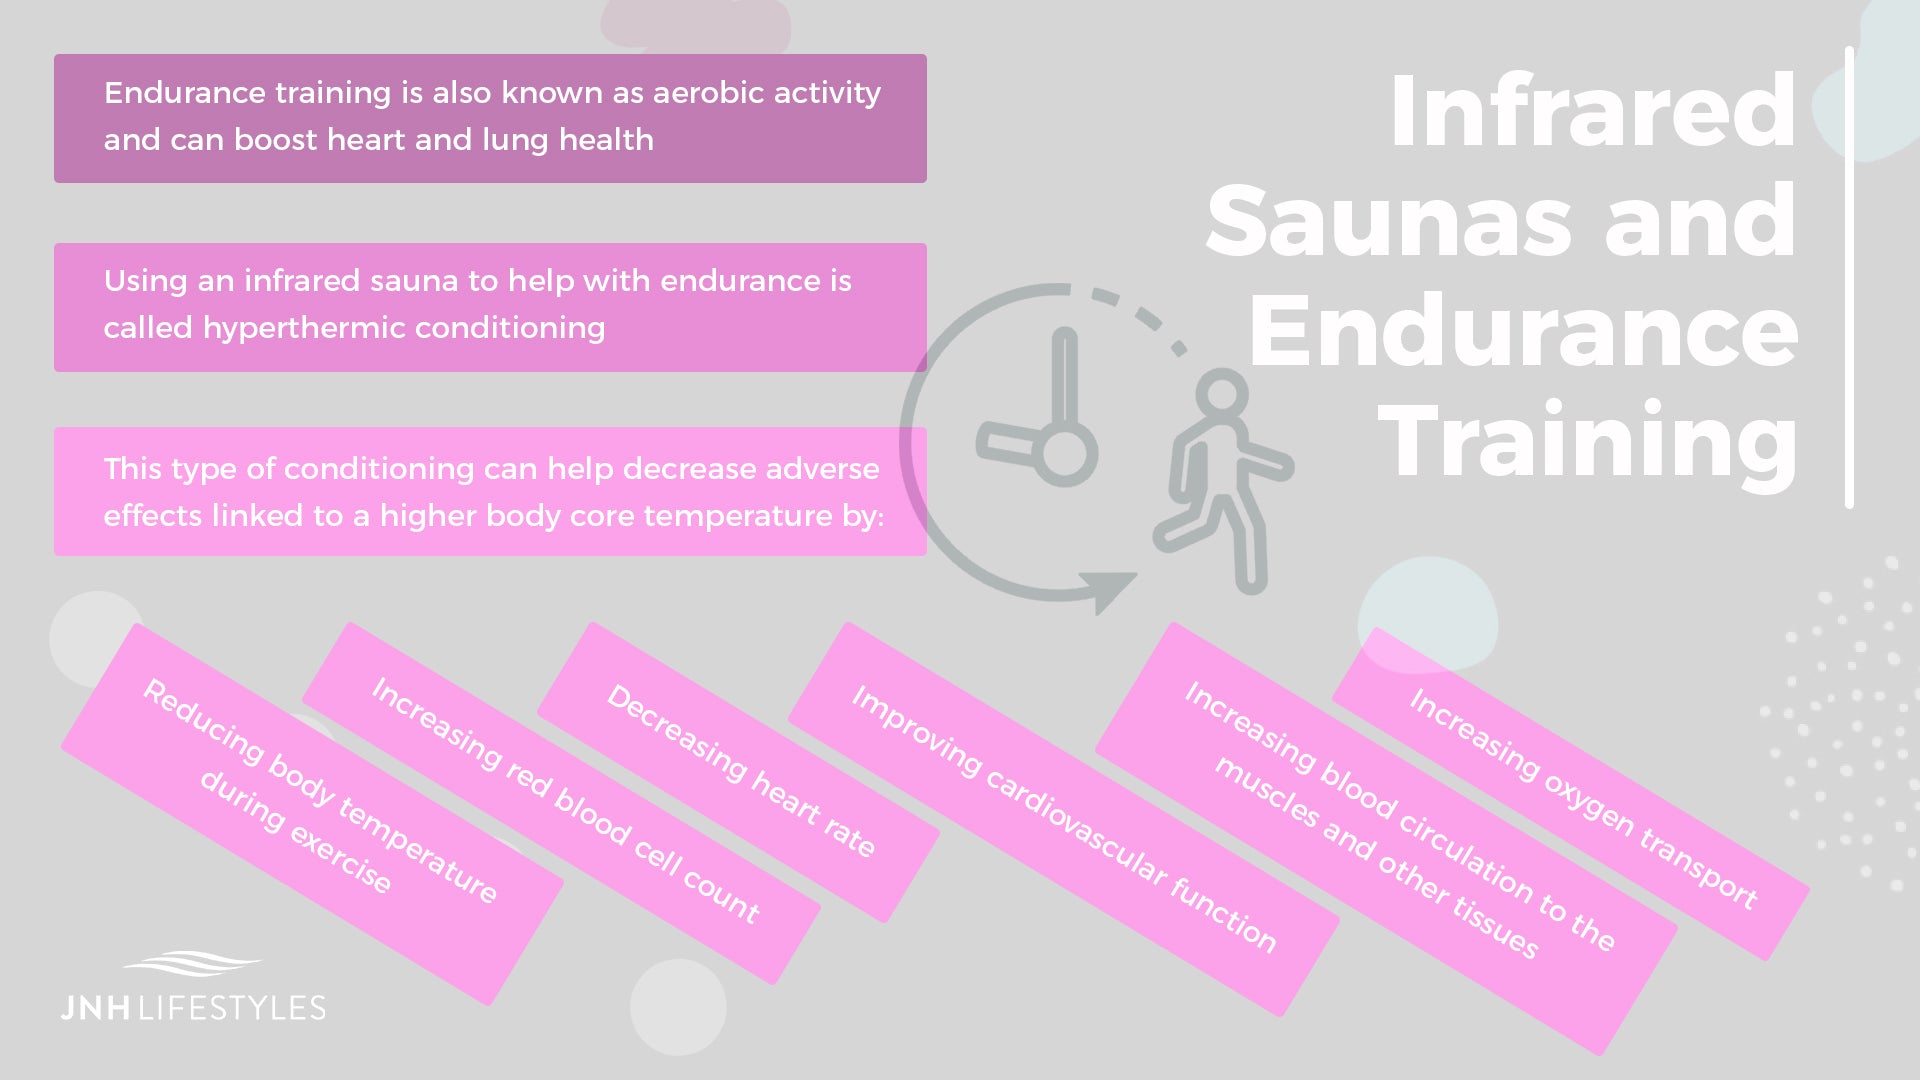 Infrared Saunas and Endurance Training -Endurance training is also known as aerobic activity and can boost heart and lung health -Using an infrared sauna to help with endurance is called hyperthermic conditioning -This type of conditioning can help decrease adverse effects linked to a higher body core temperature by: -Improving cardiovascular function -Decreasing heart rate -Reducing body temperature during exercise -Increasing blood circulation to the muscles and other tissues -Increasing oxygen transport -Increasing red blood cell count